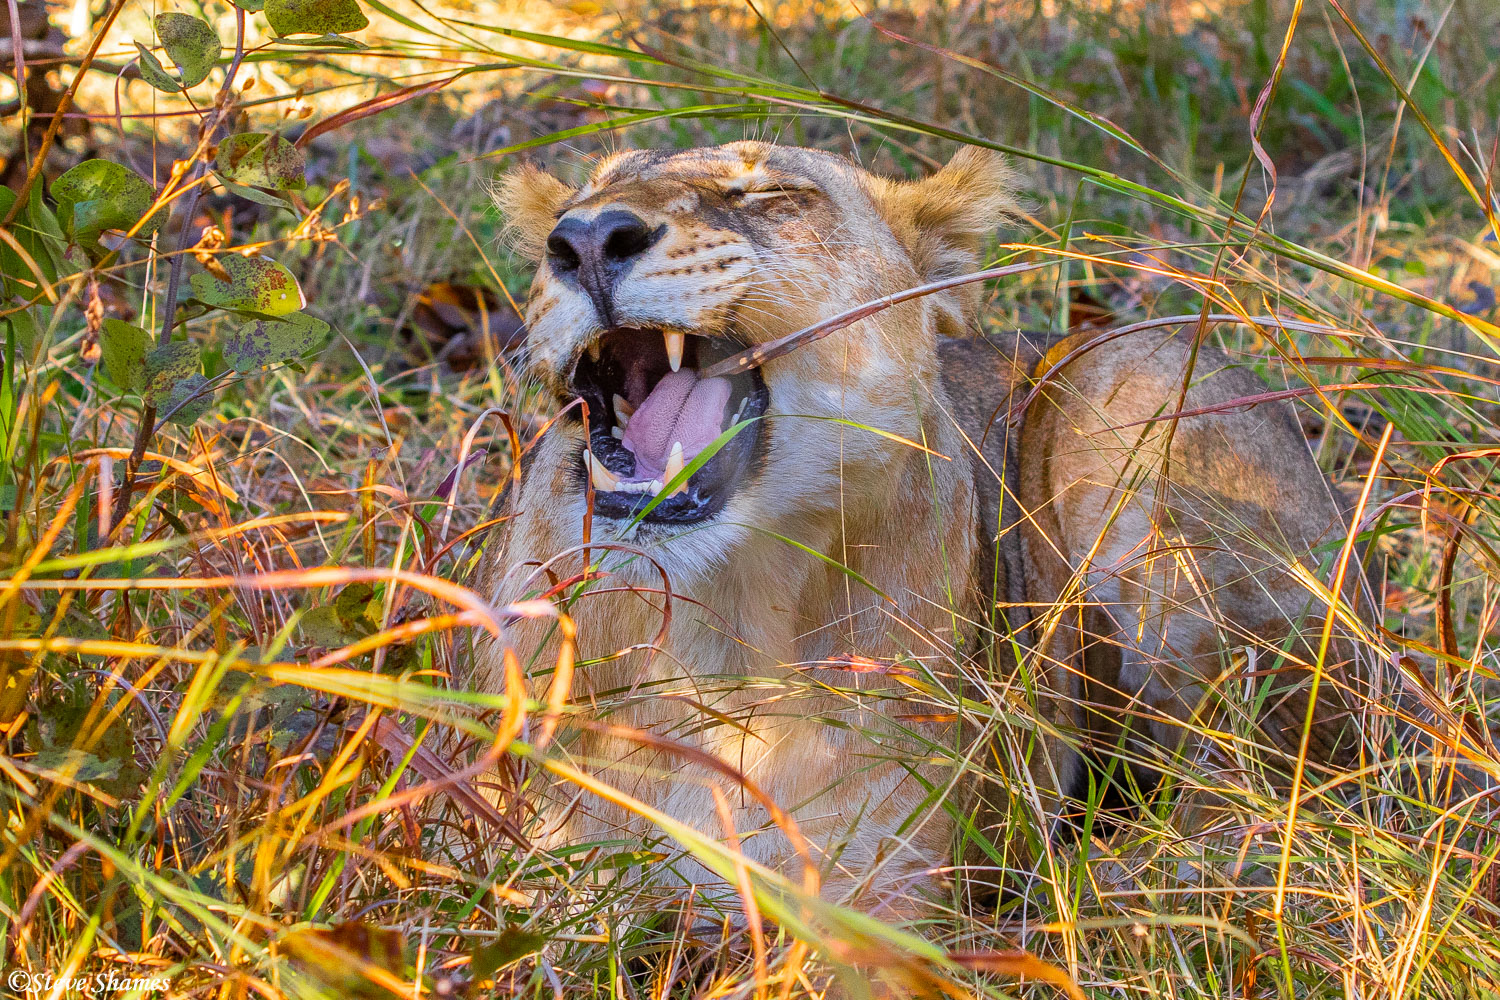 Lioness appears to be eating some grass. They do that sometimes.